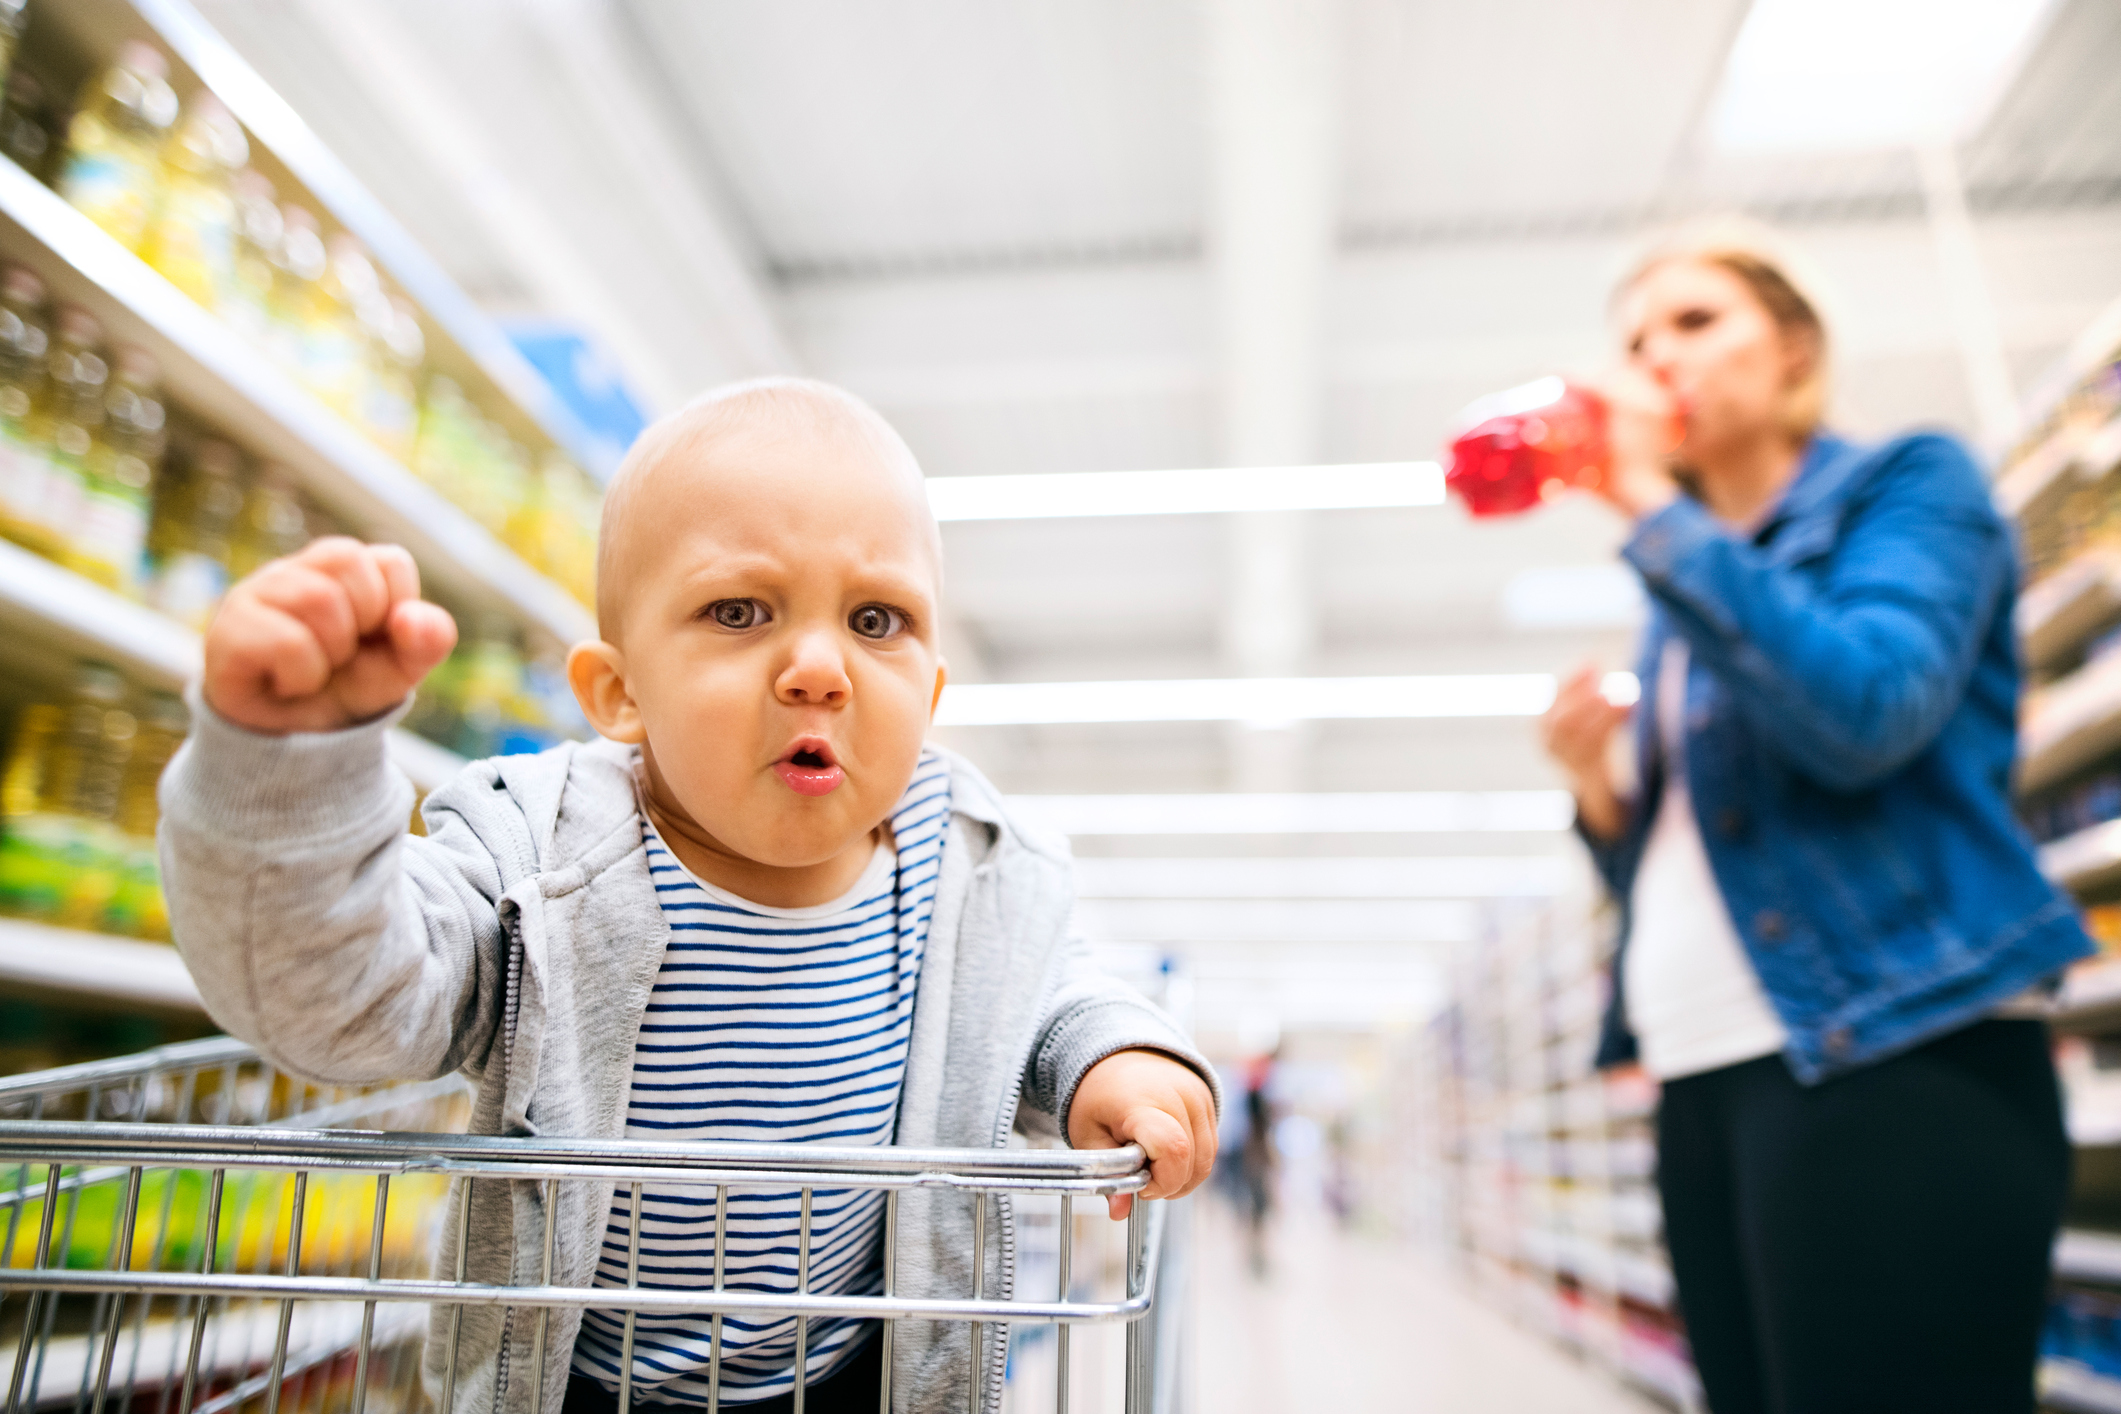 Angry looking baby sat in supermarket shopping trolly